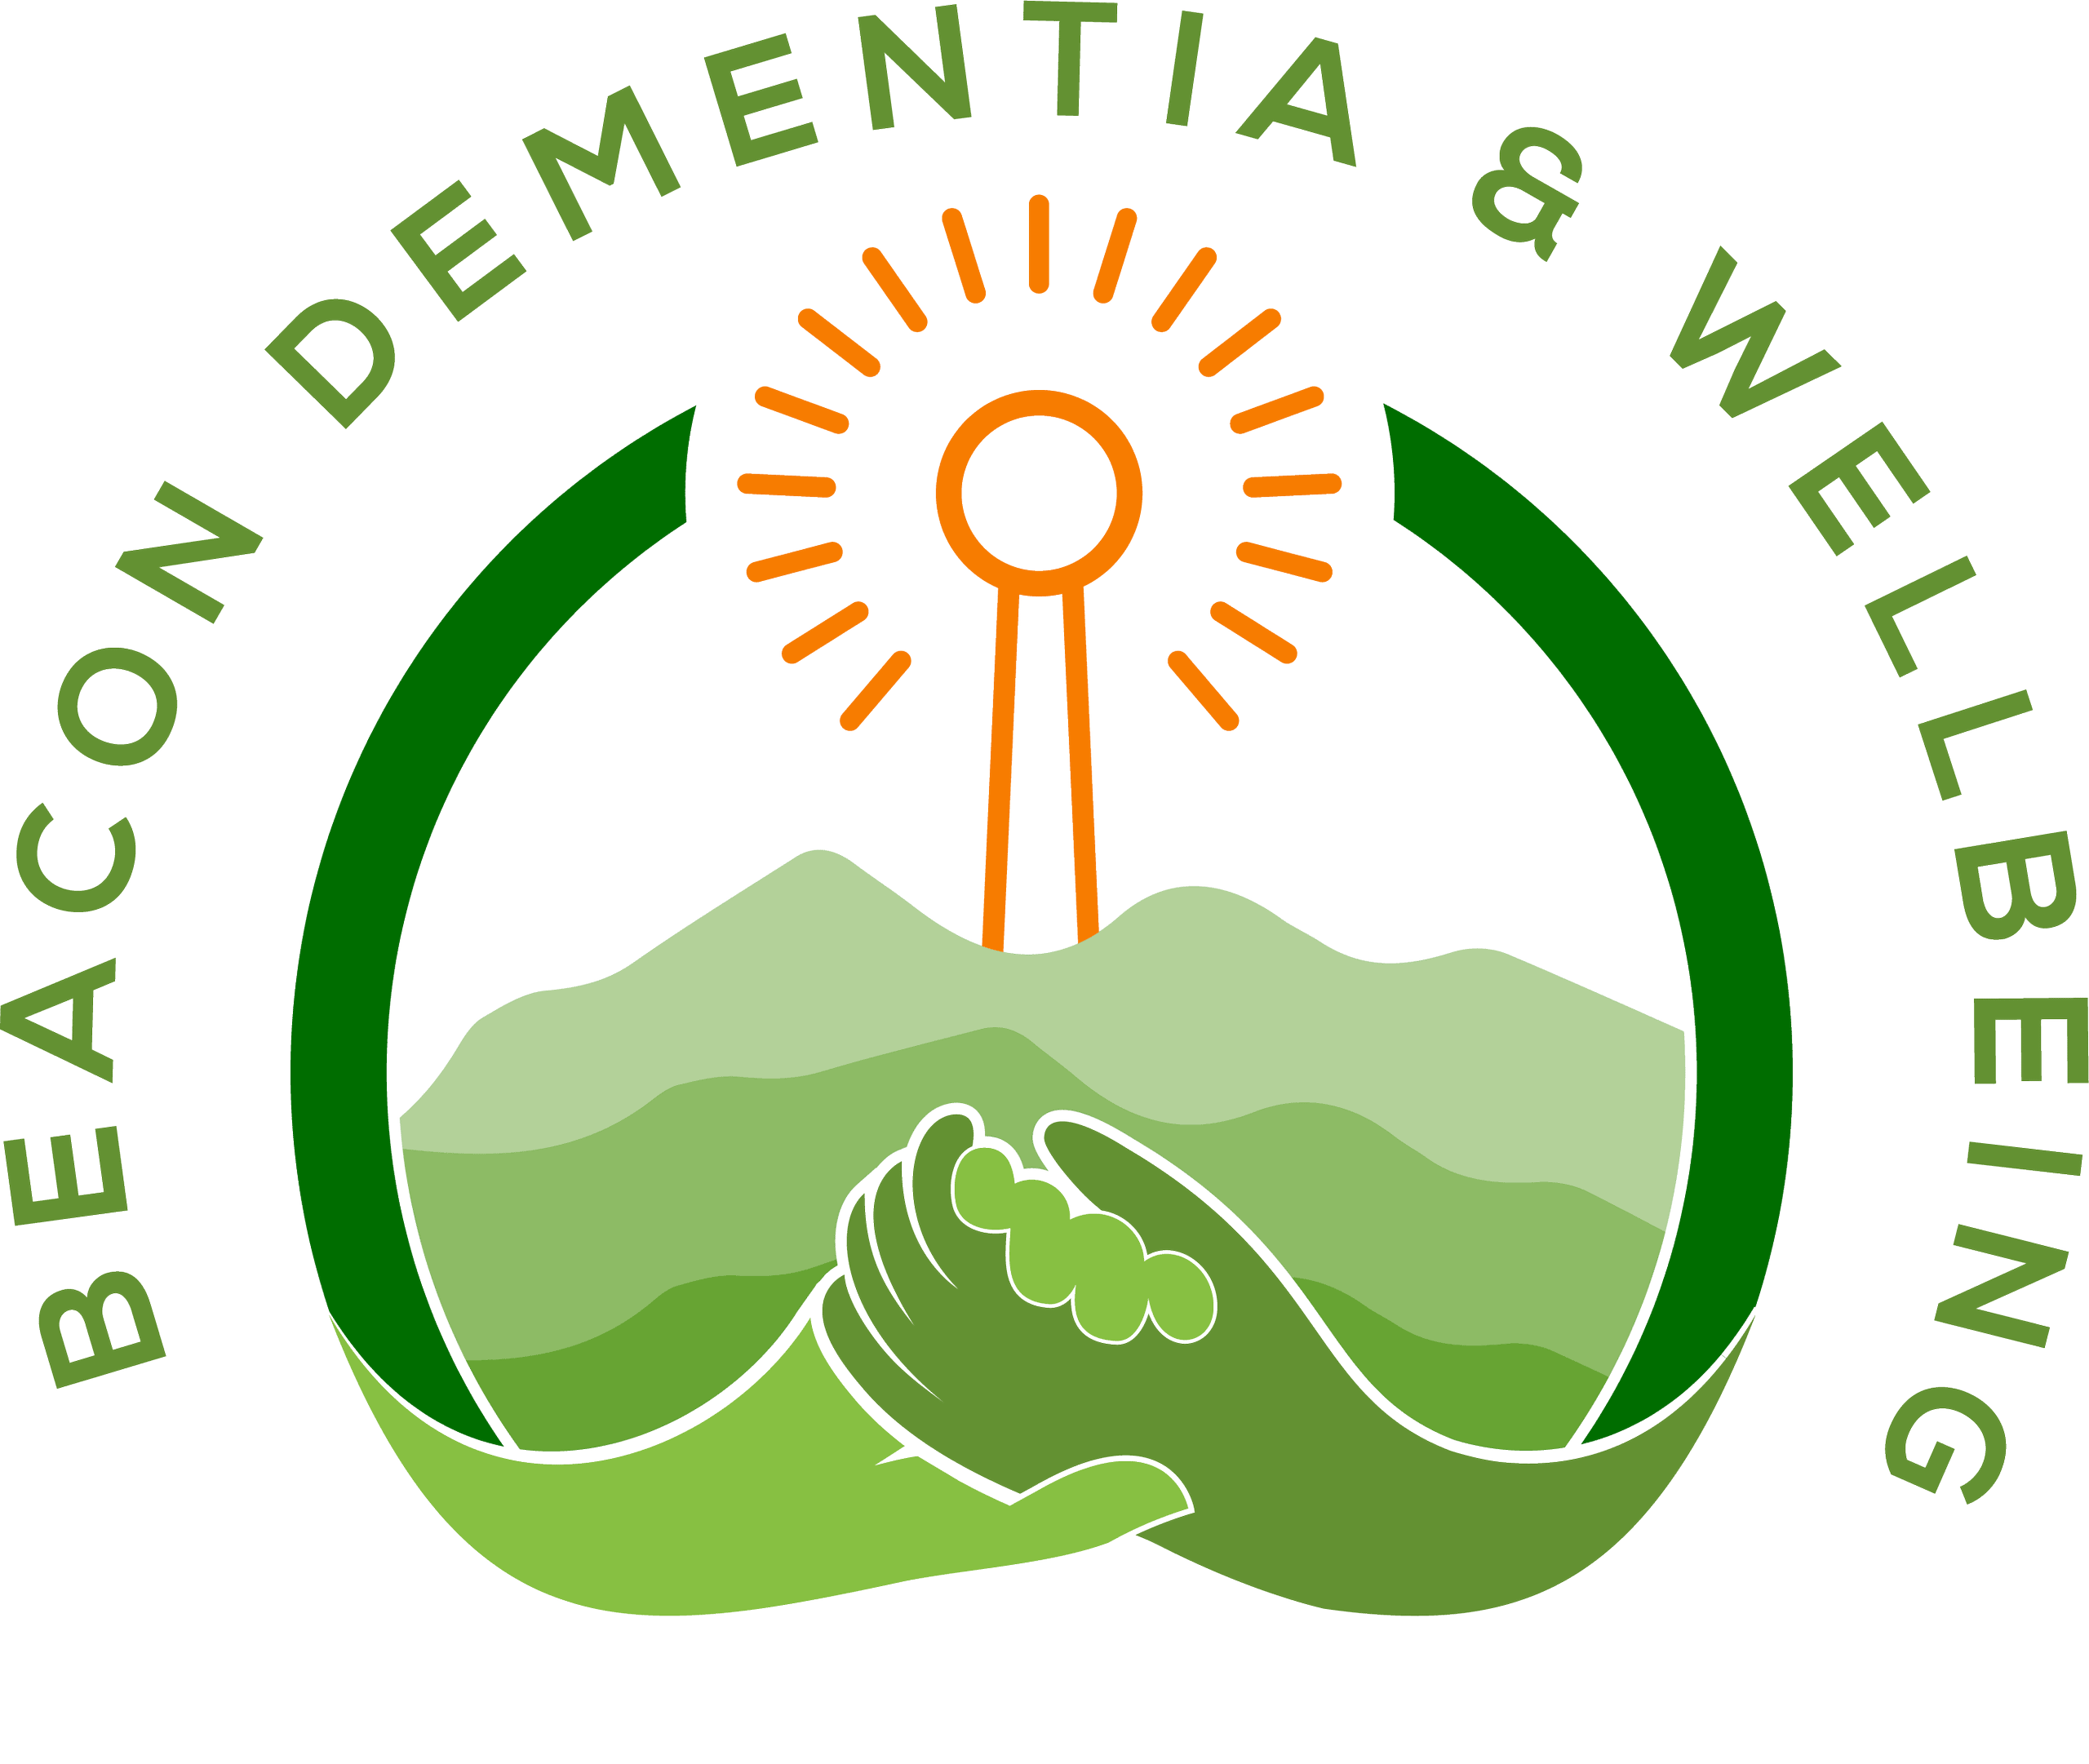 Beacon Dementia and Wellbeing